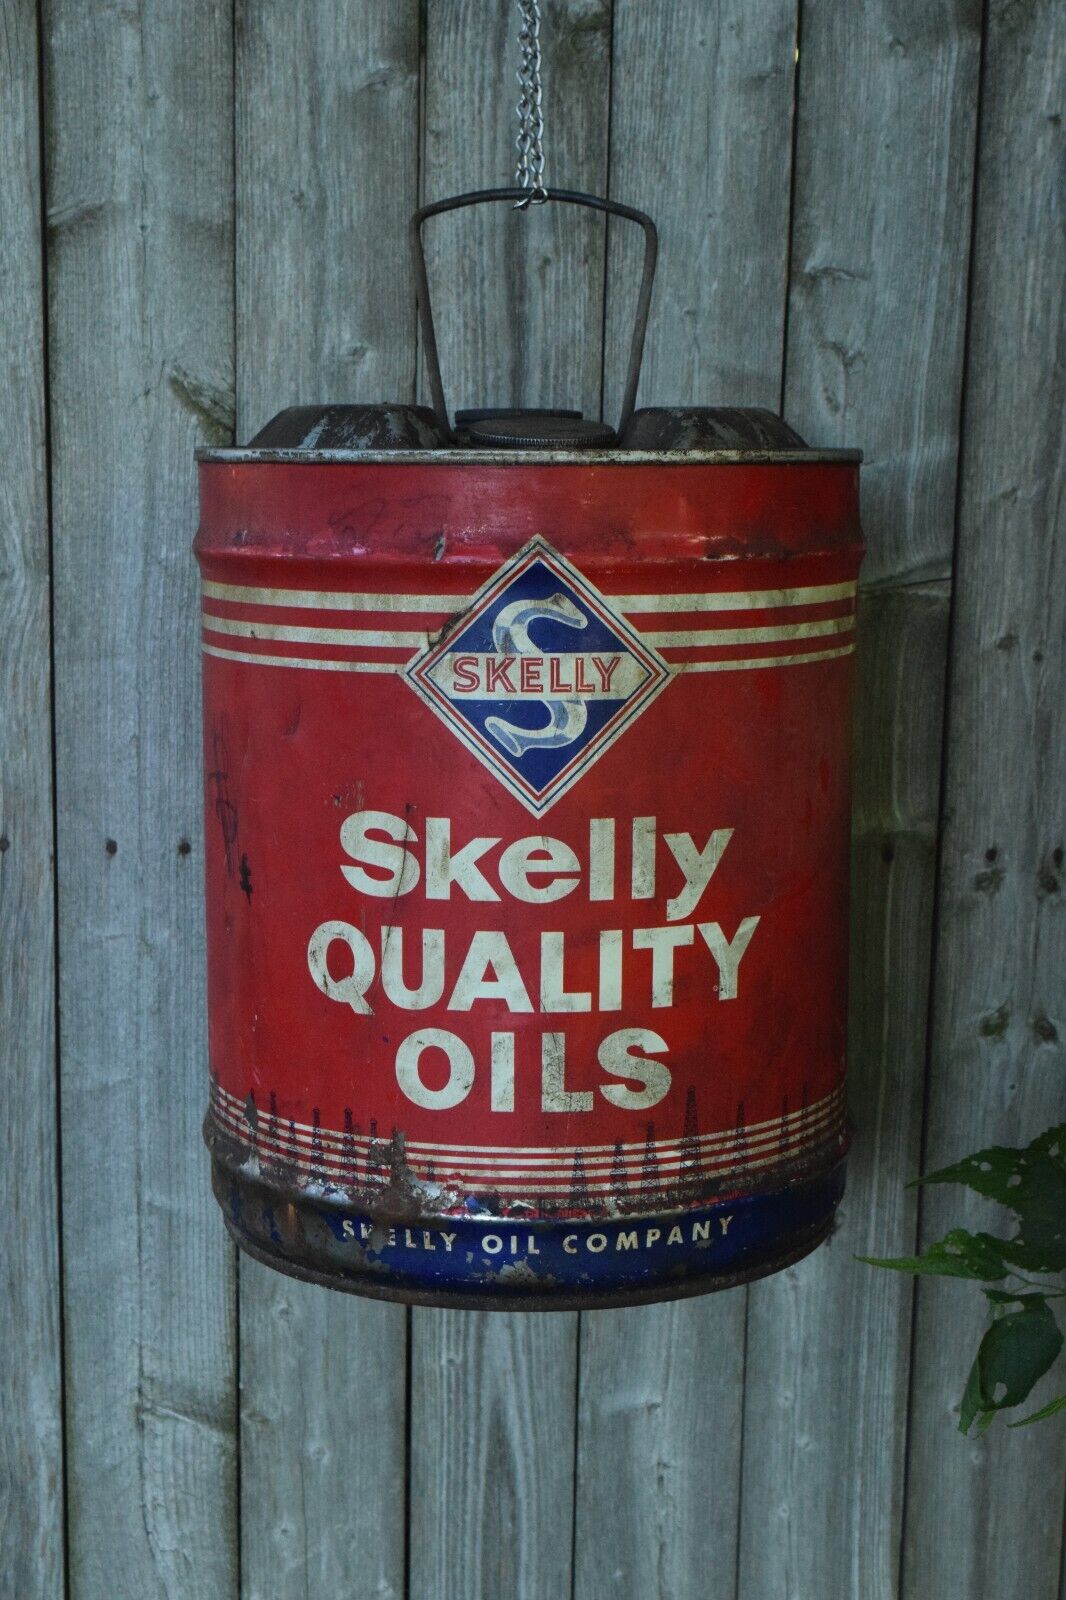 1967 SKELLY QUALITY OILS 5 GALLON TAGOLENE GEAR LUBE SAE 90 METAL CAN SIGN